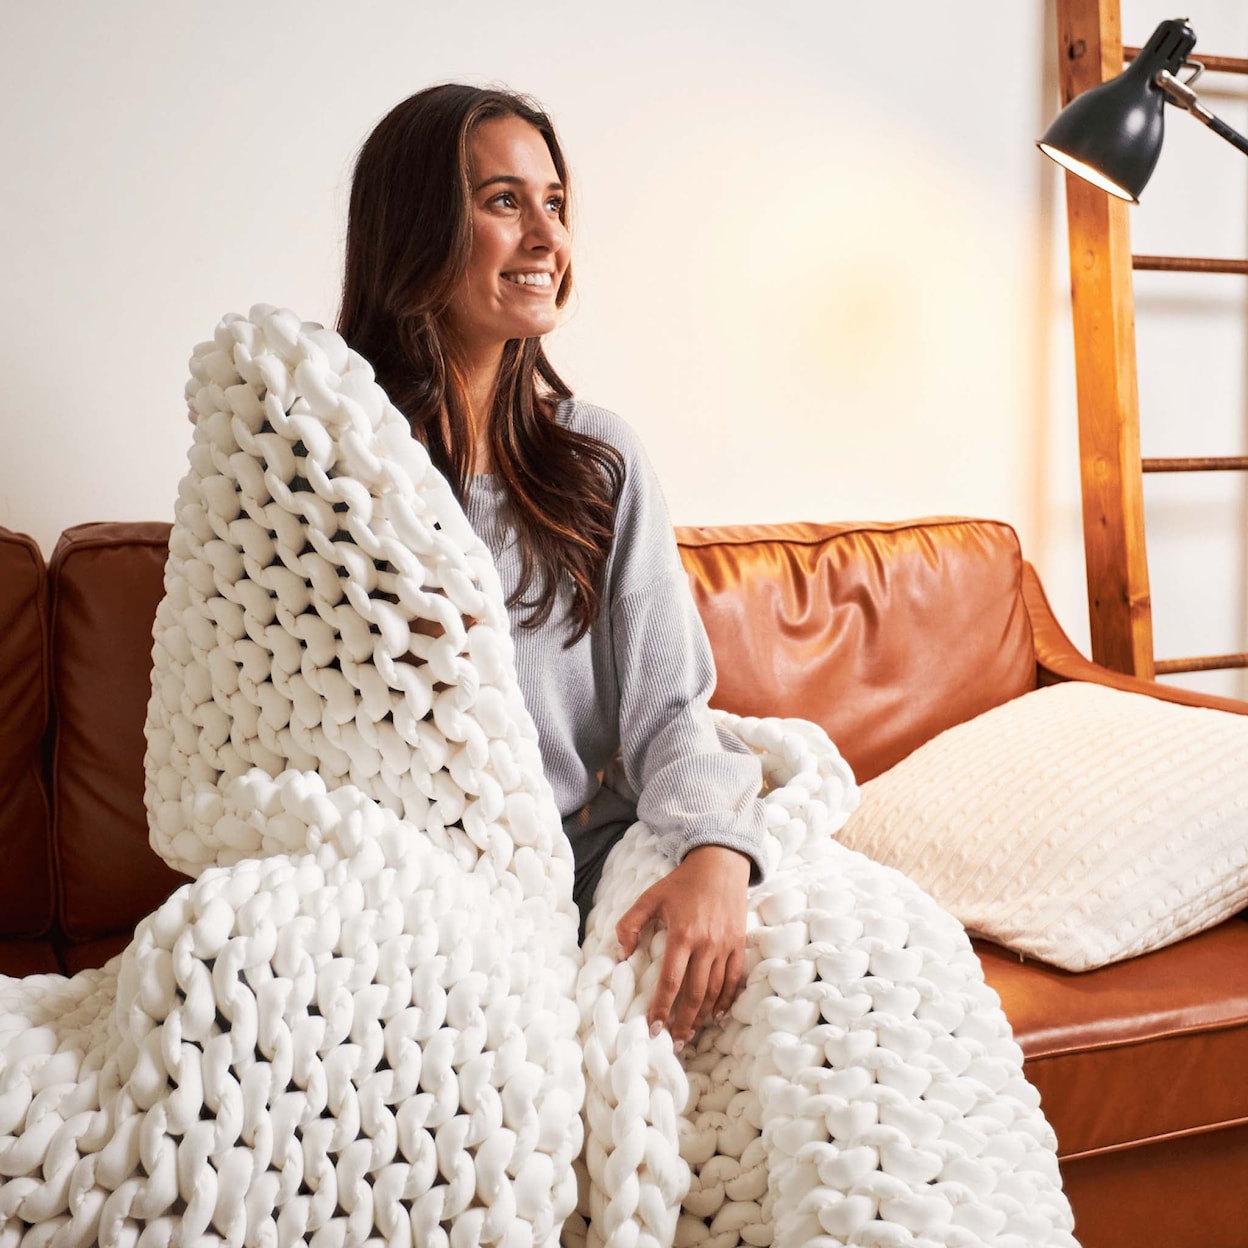 Hush Knit 15lbs Cream Cotton Knit Weighted Blanket